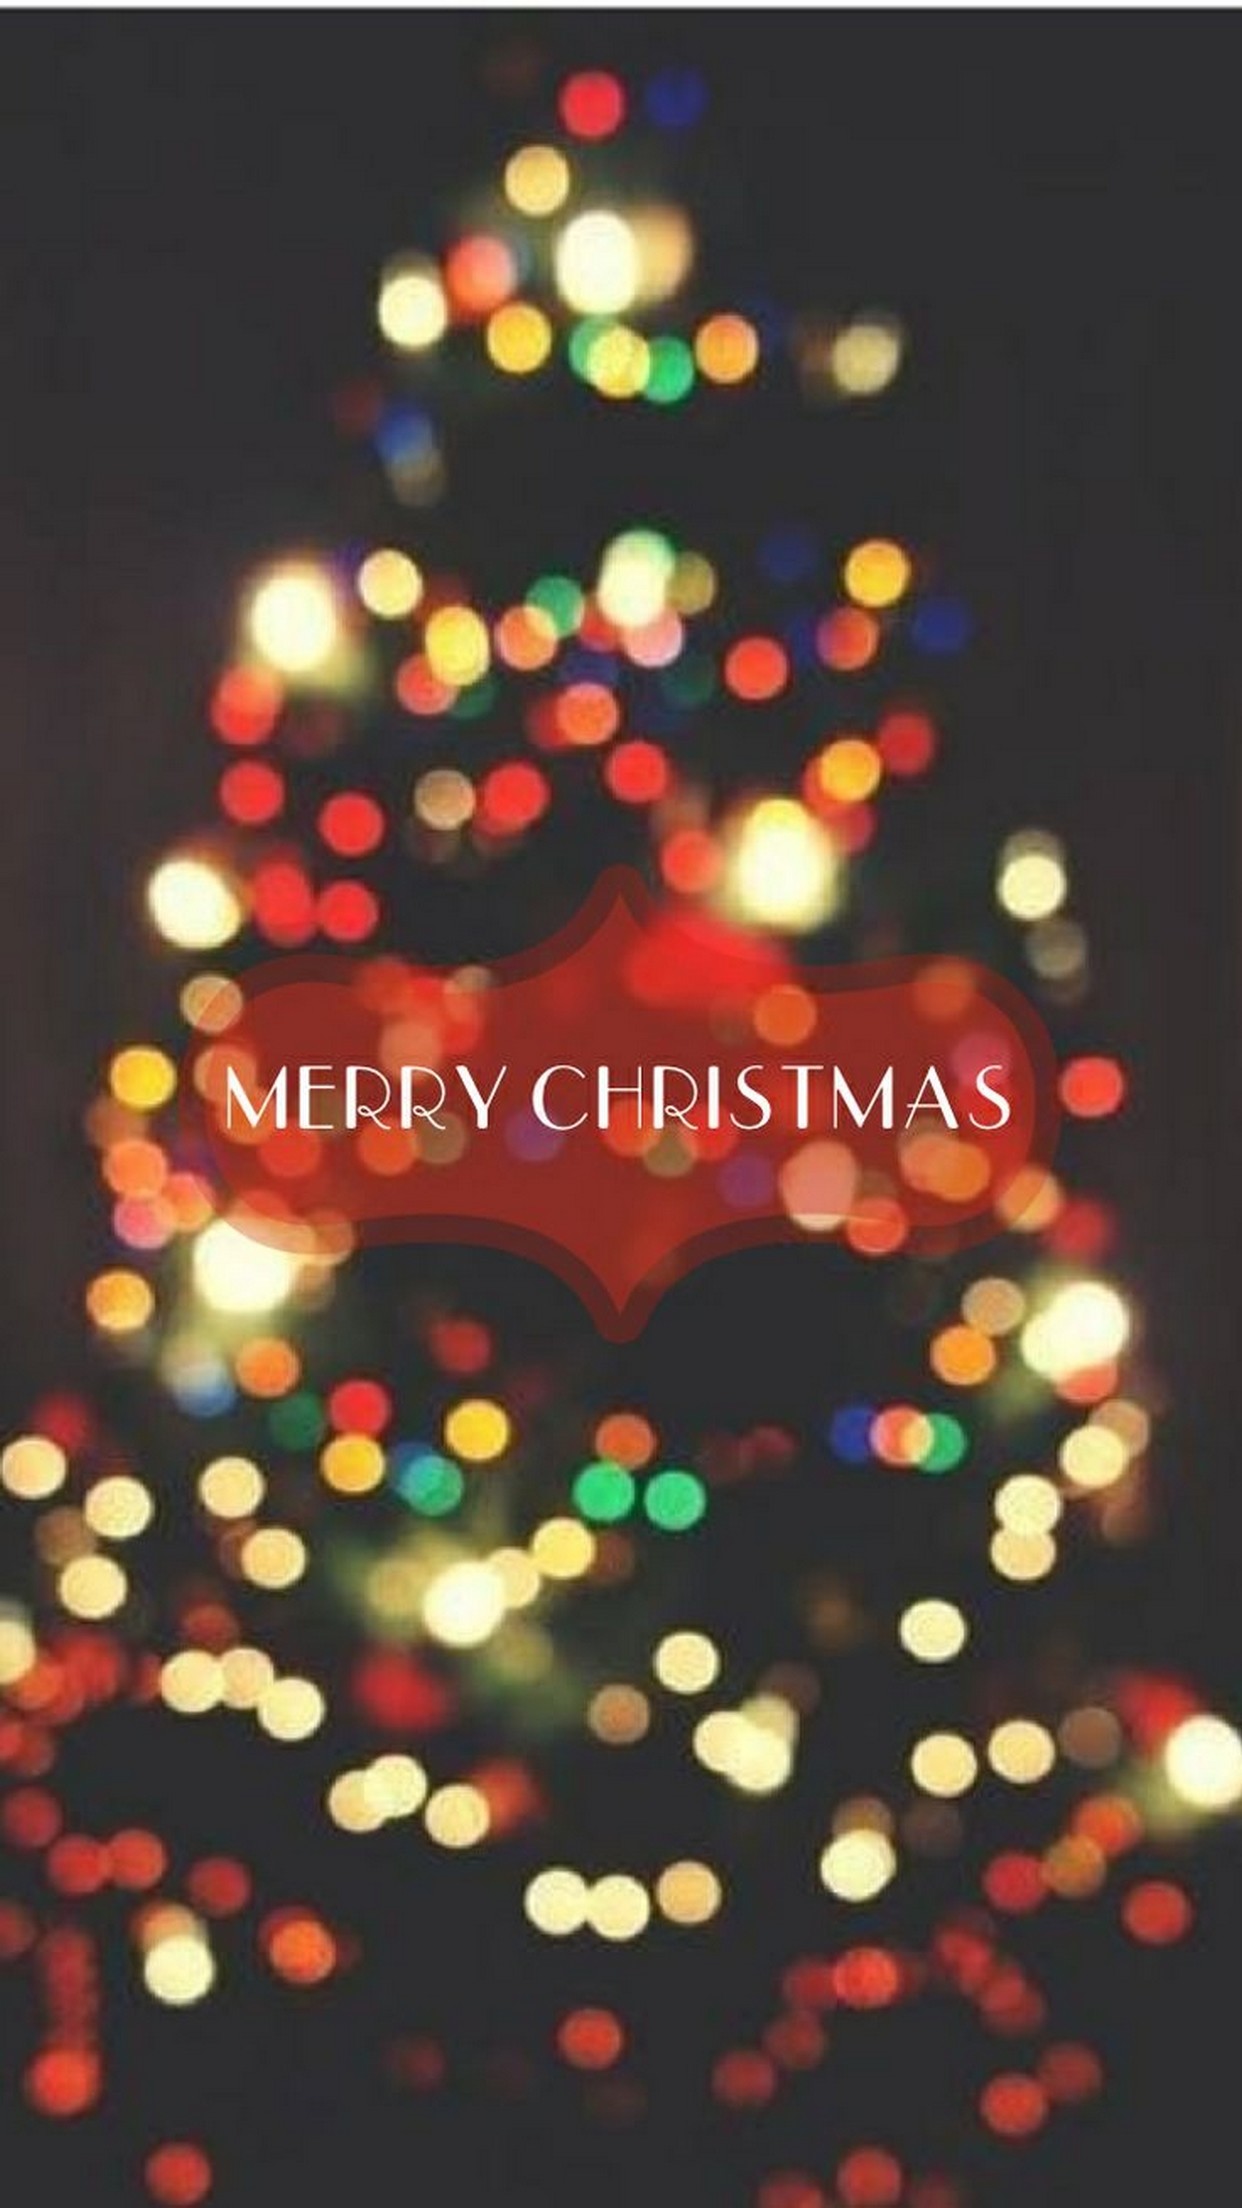 Christmas Wallpaper For iPhone Image